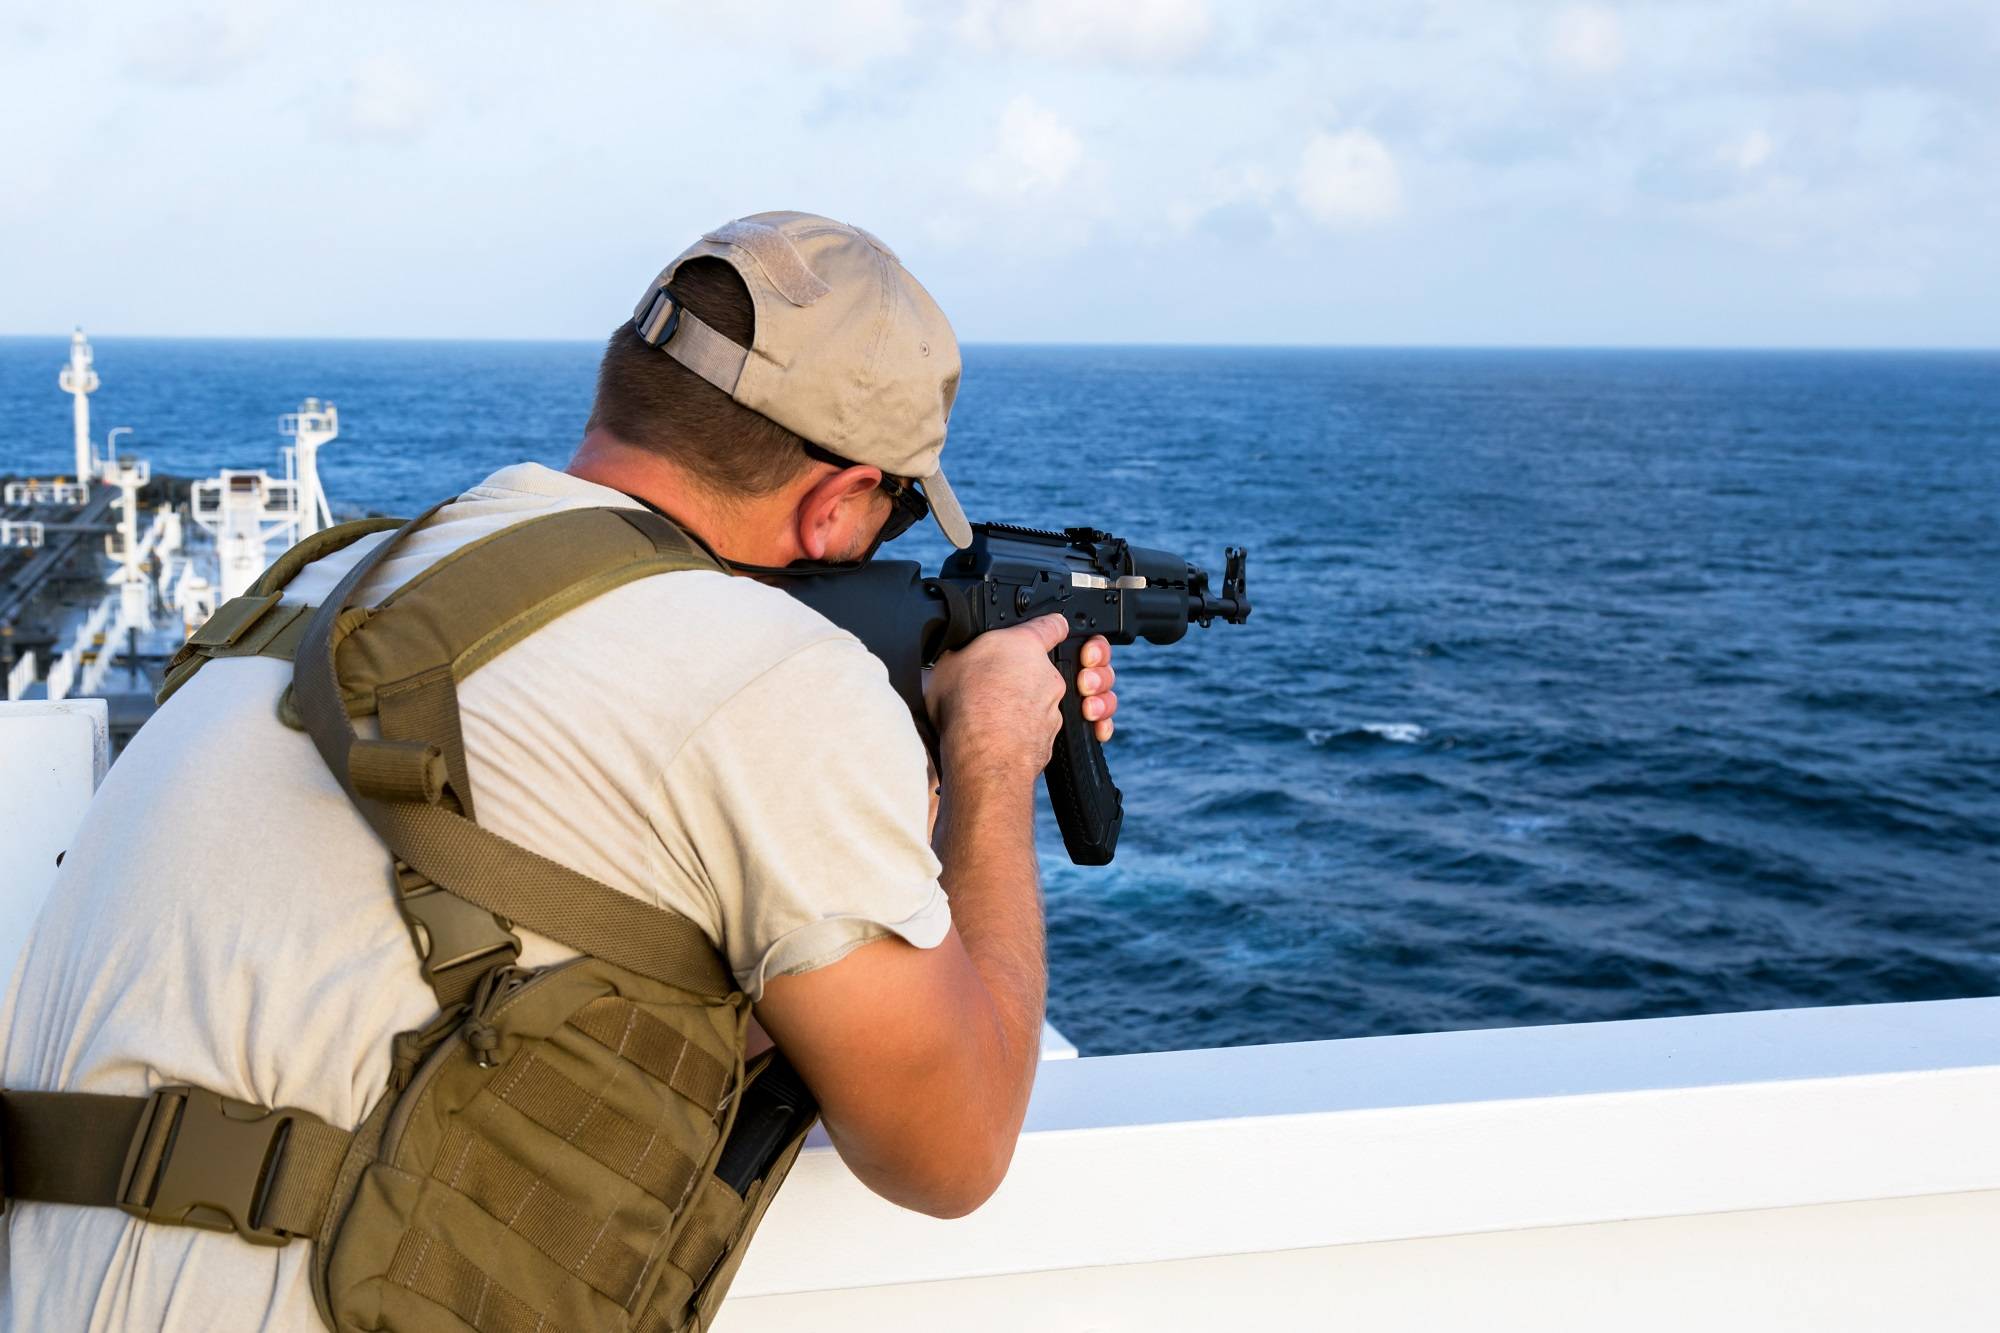 OCIMF Issues Guidance On Hiring Private Maritime Security Guards